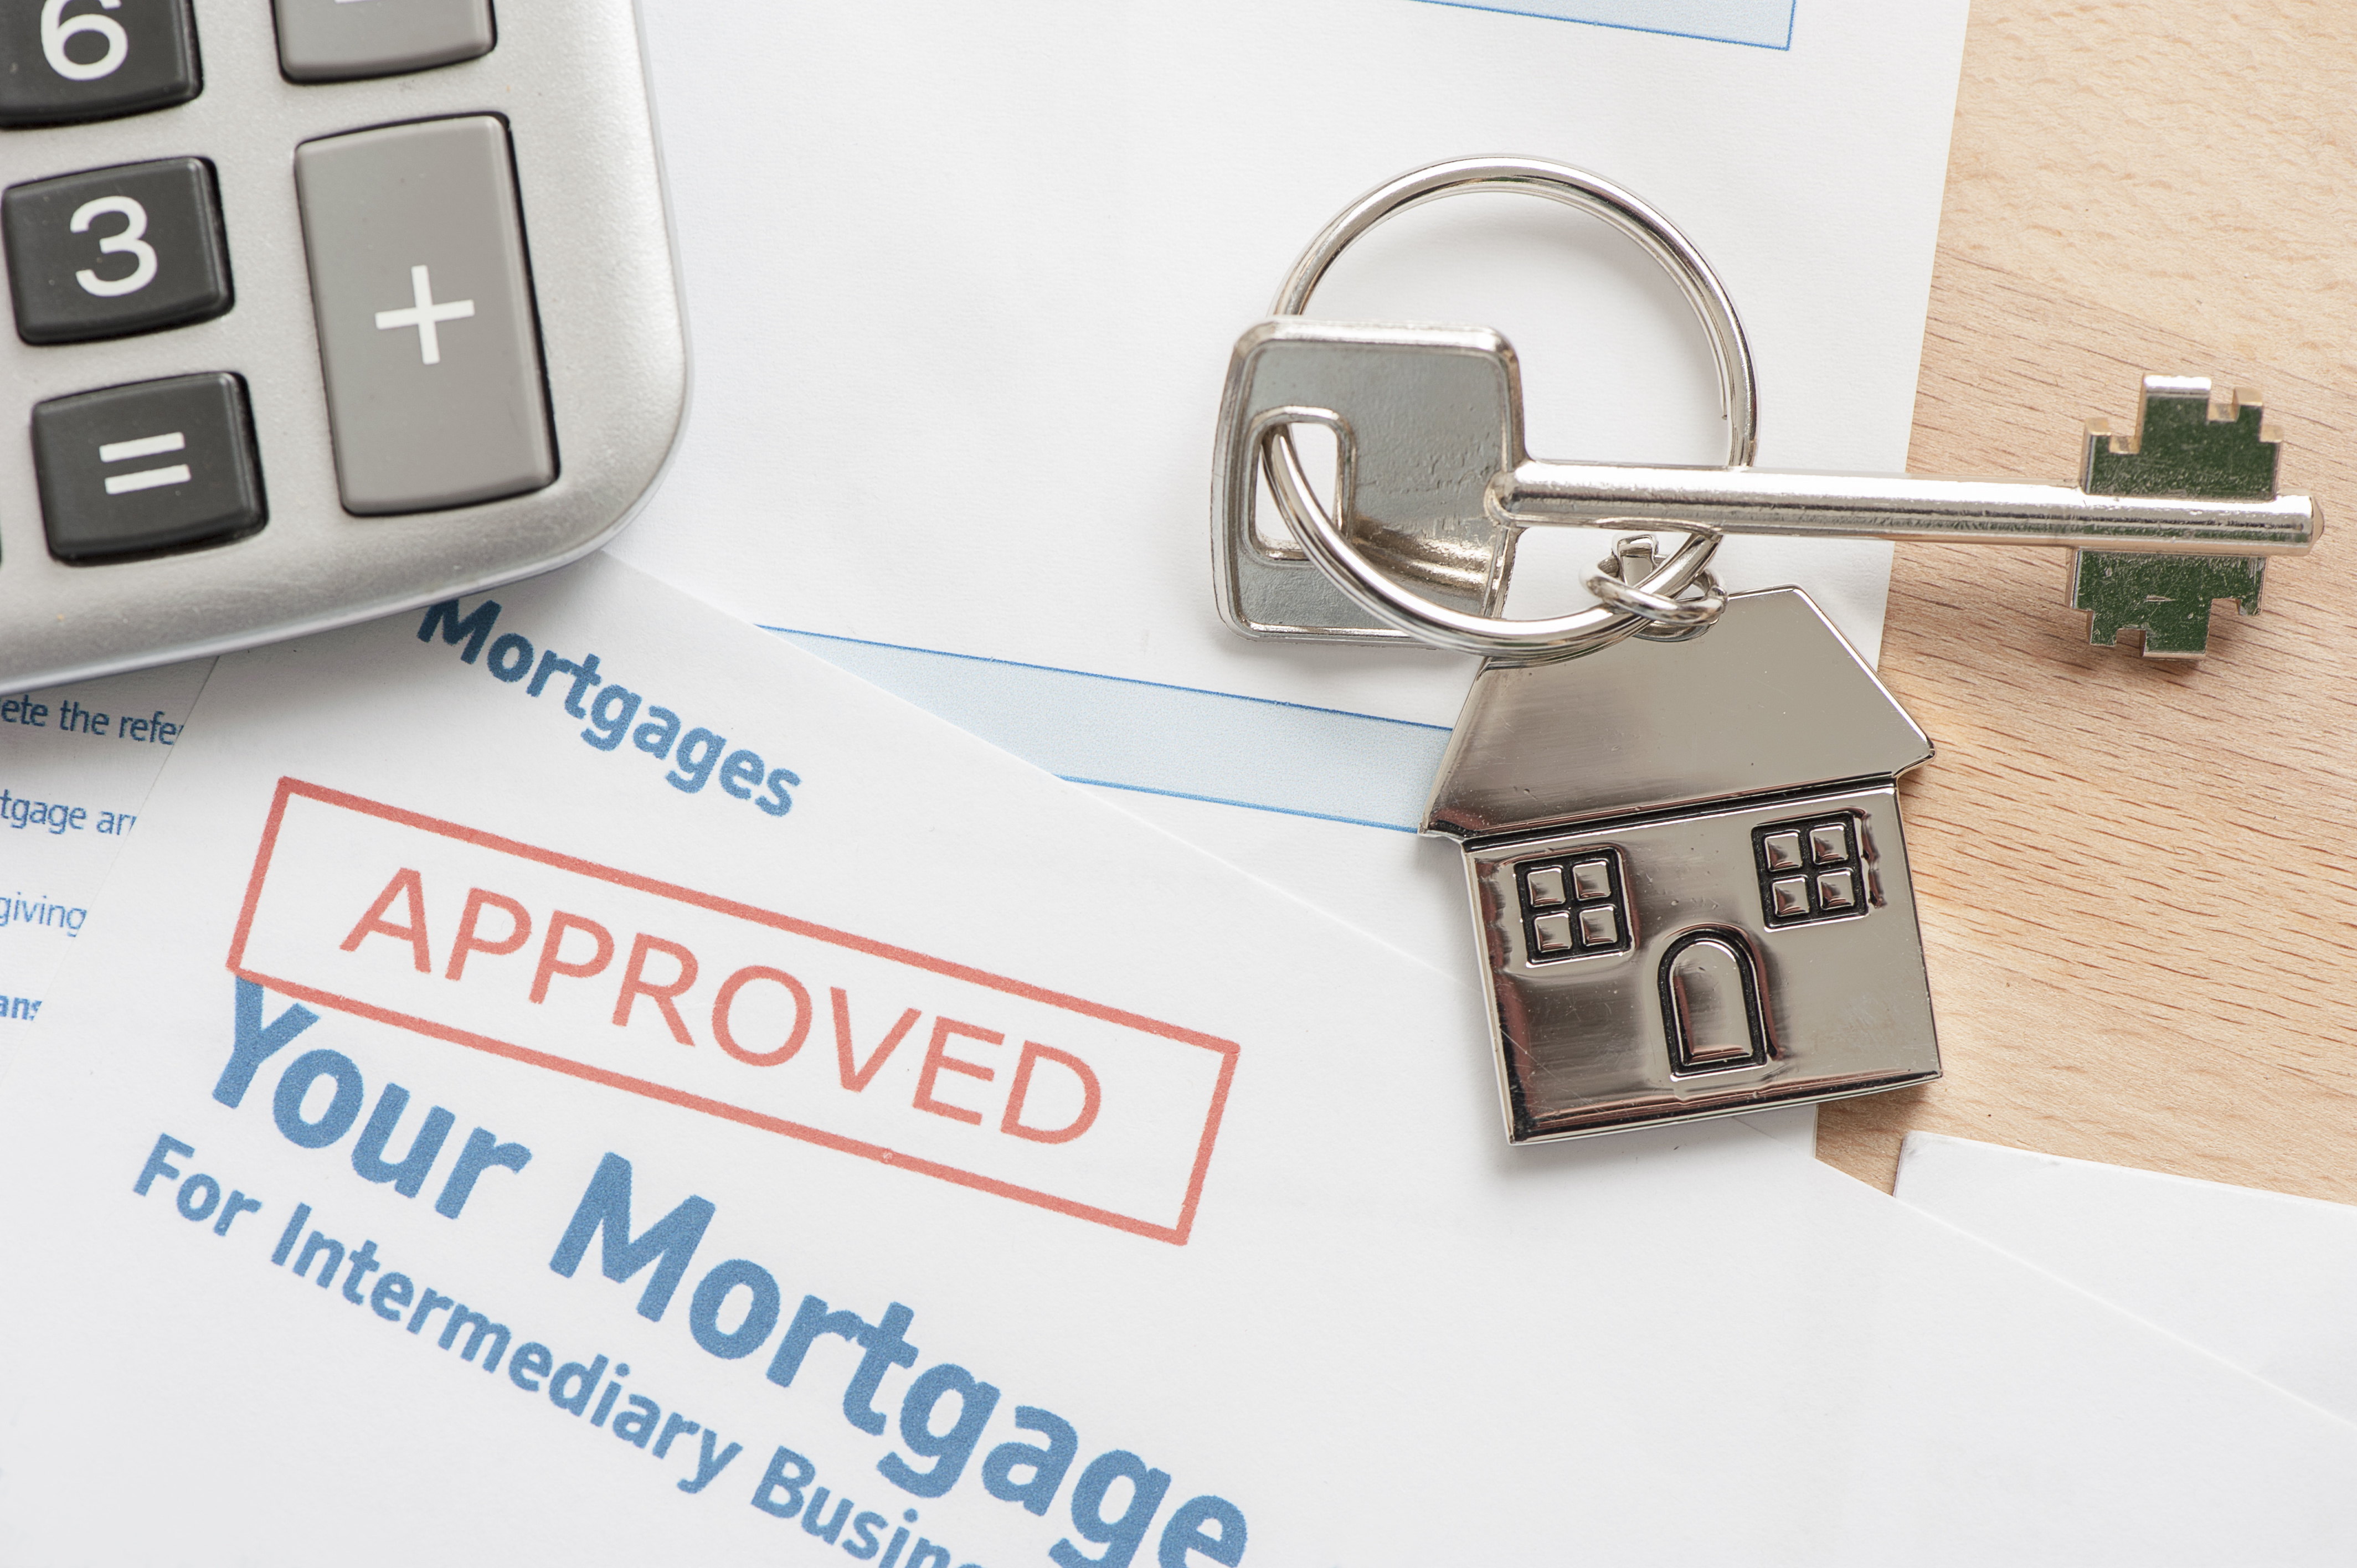 Landlords benefit from favourable buy-to-let mortgage deals